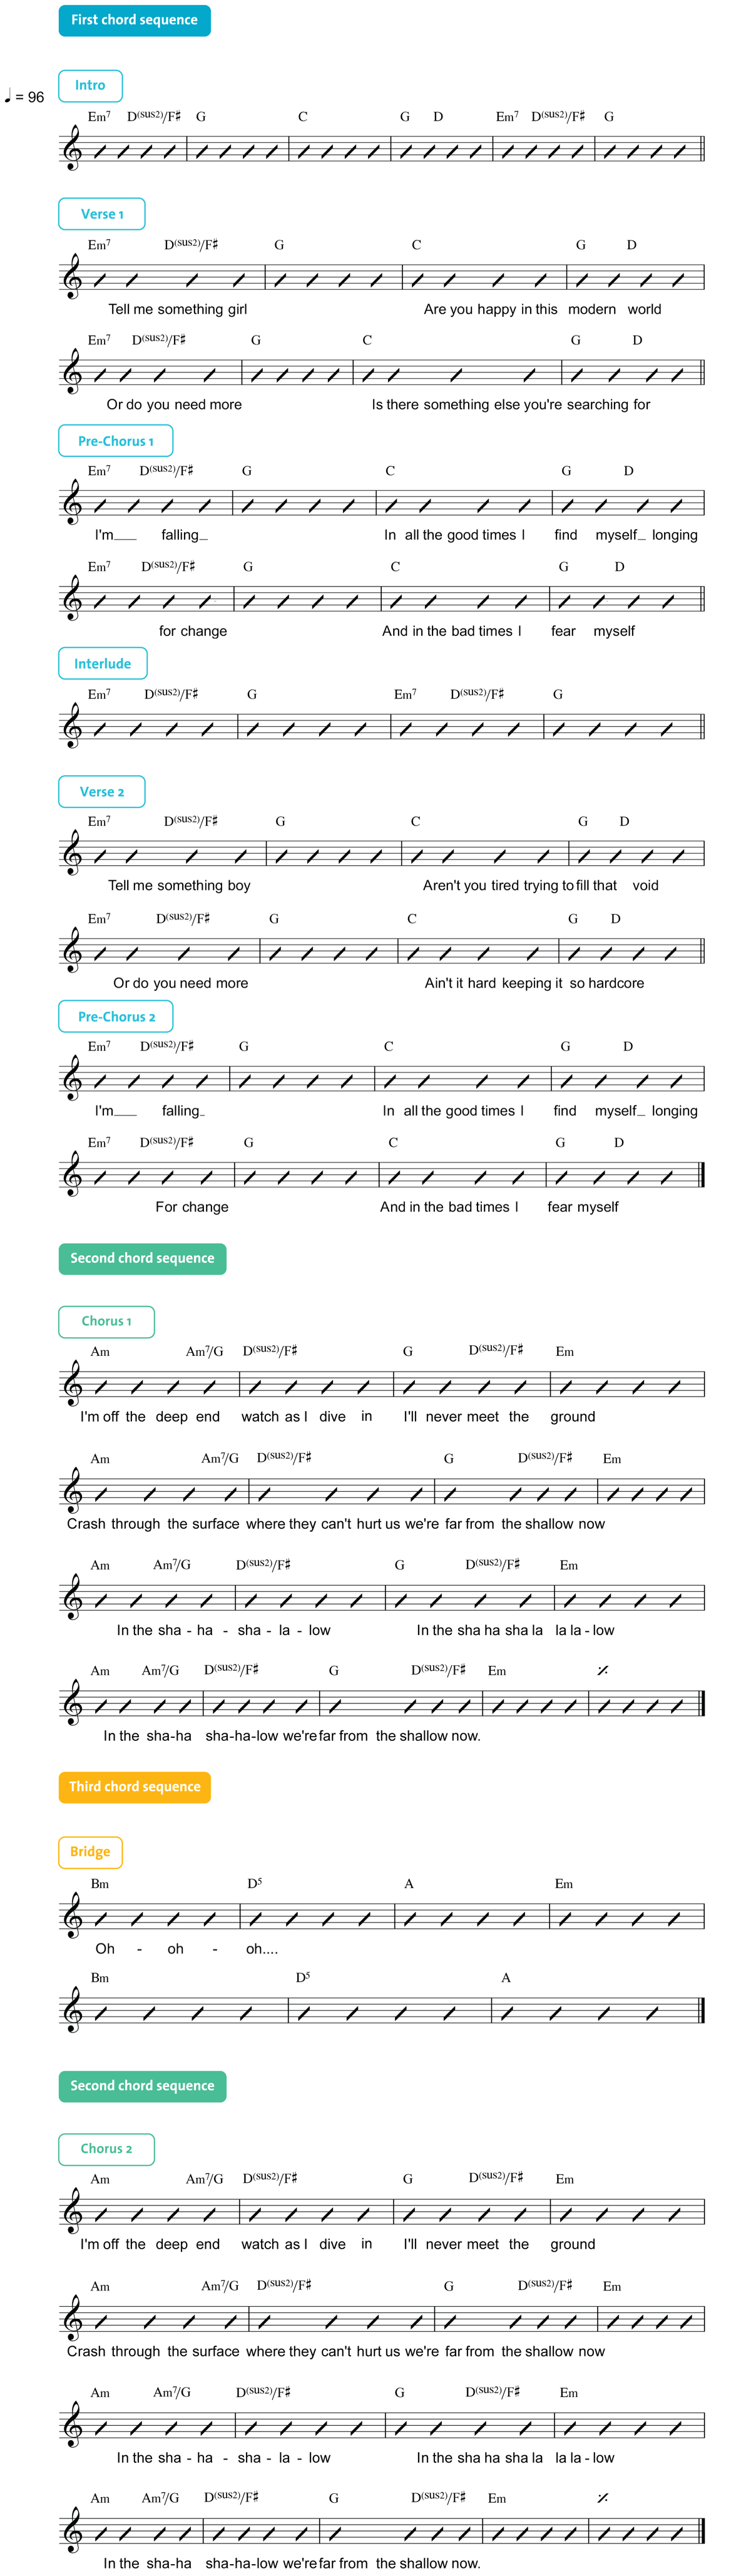 Figure 19: “Shallow” on guitar entire song with lyrics